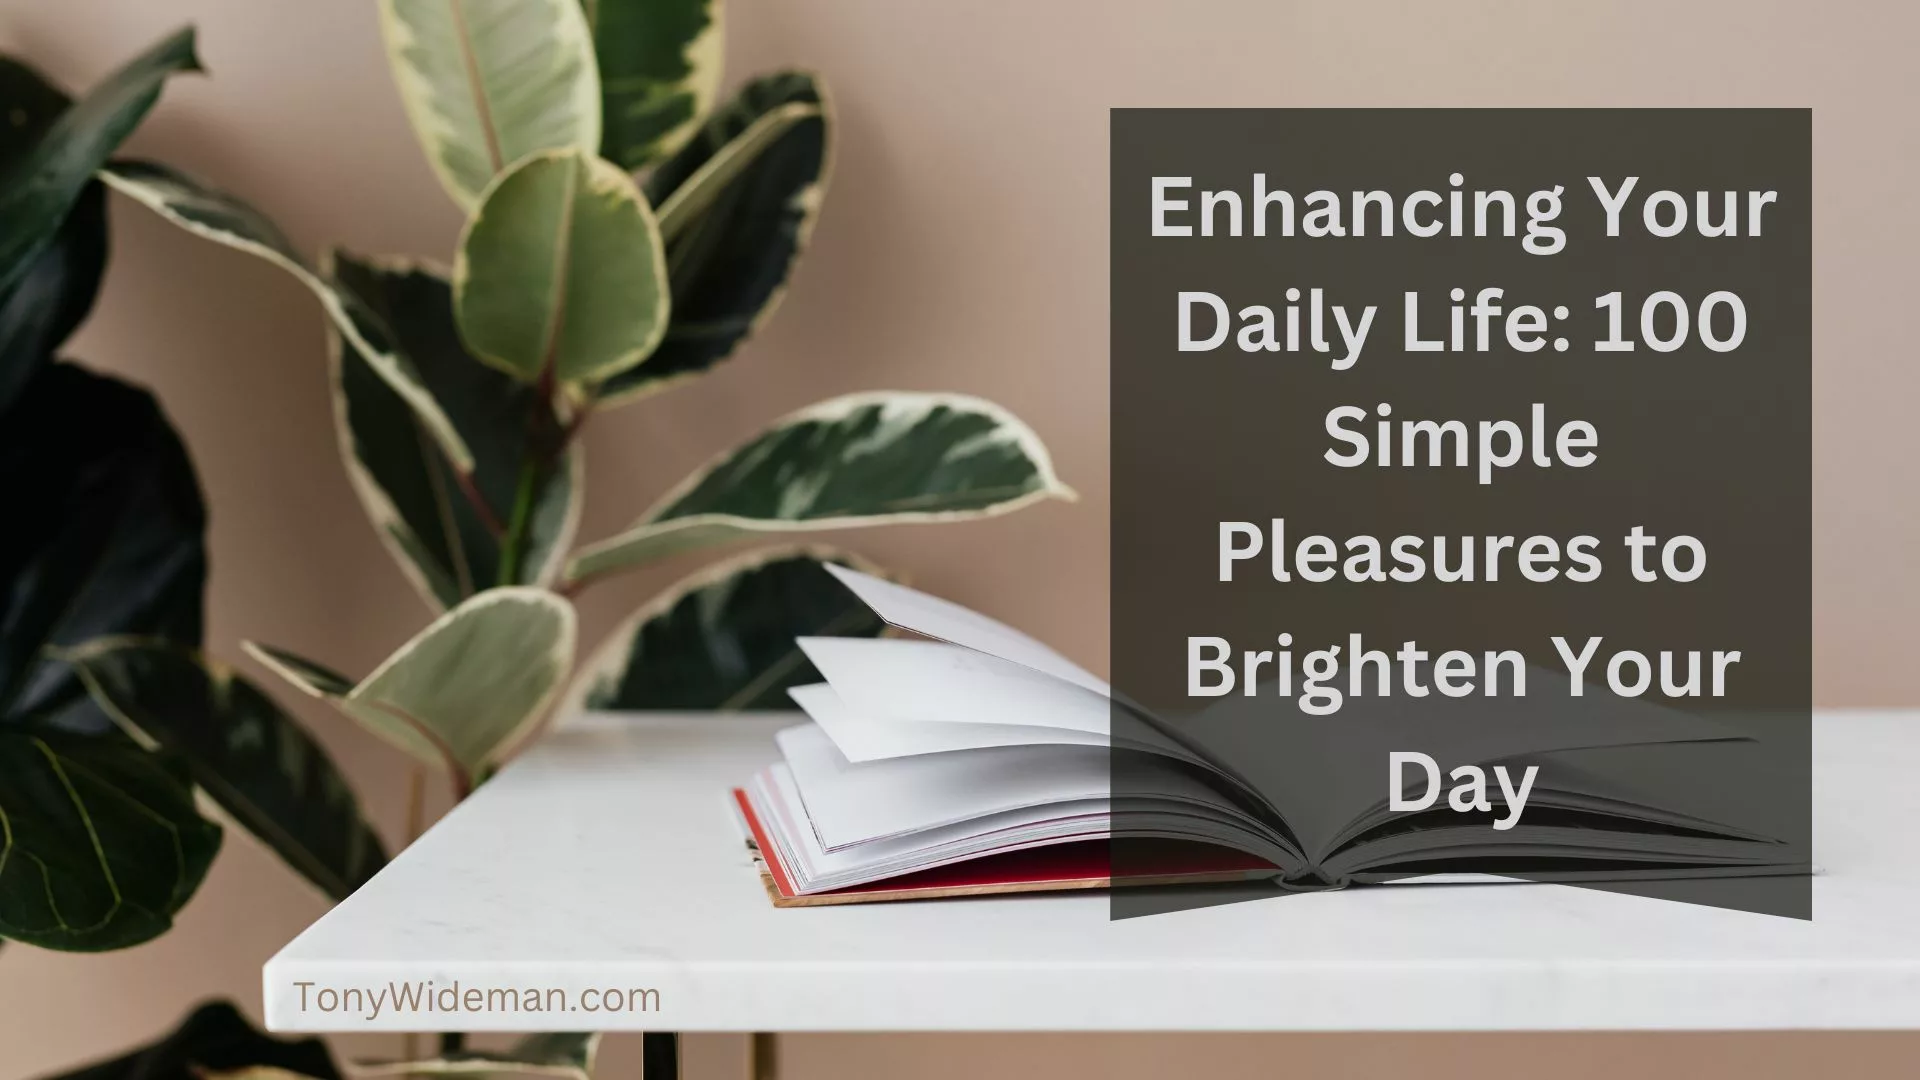 Enhancing Your Daily Life: 100 Simple Pleasures to Brighten Your Day